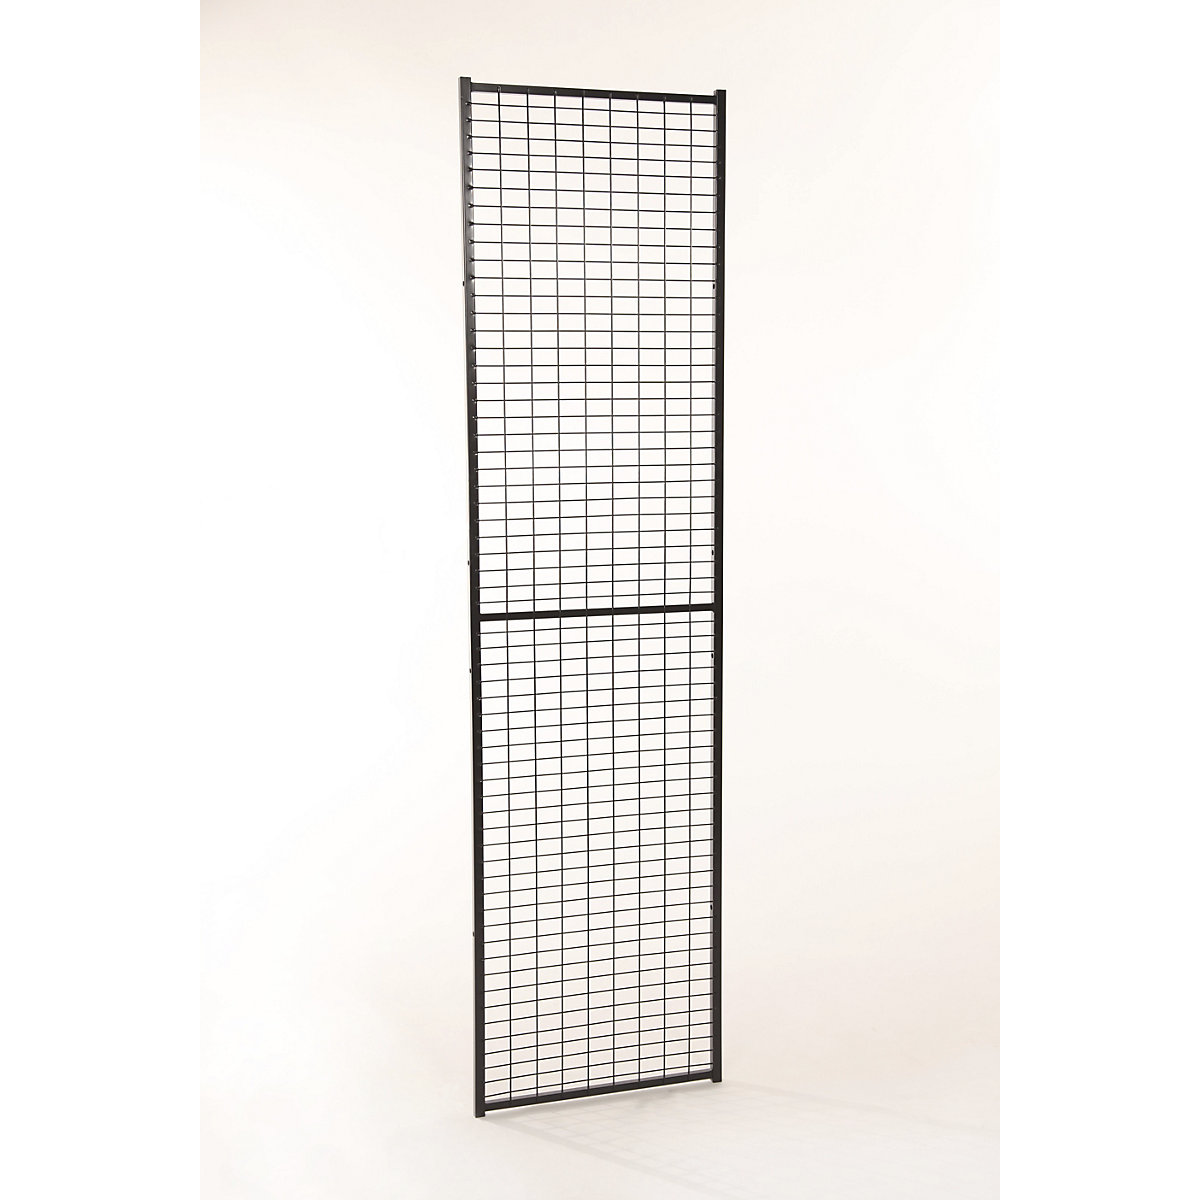 X-GUARD LITE machine protective fencing, wall section – Axelent, height 1900 mm, width 400 mm-14